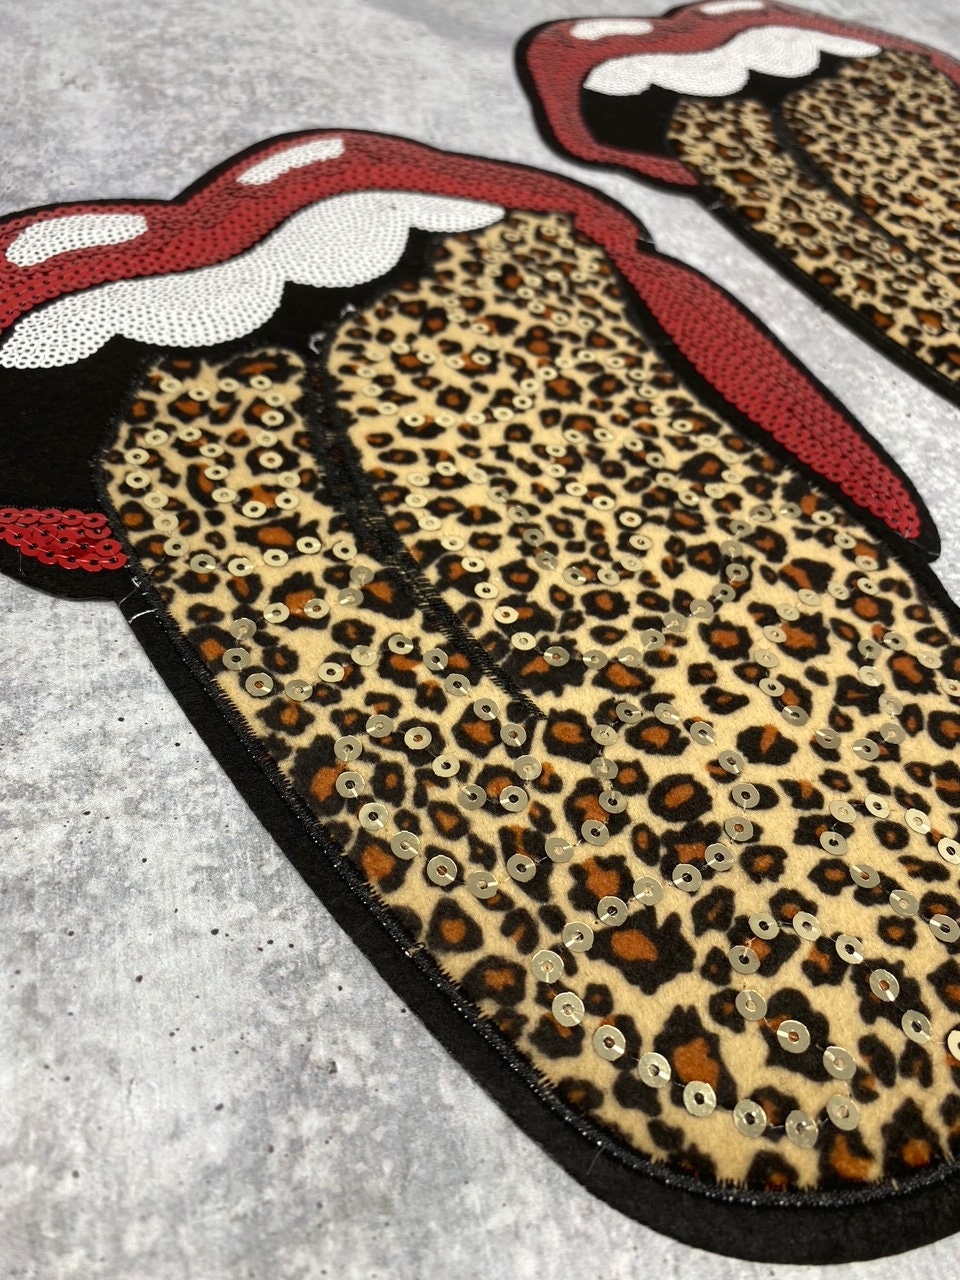 NEW, Leopard Sequin Lips With Velvet Tongue Patch (iron-on) Size 12", LARGE Bling Patch for Denim Jacket, Shirts, Hoodies, and More